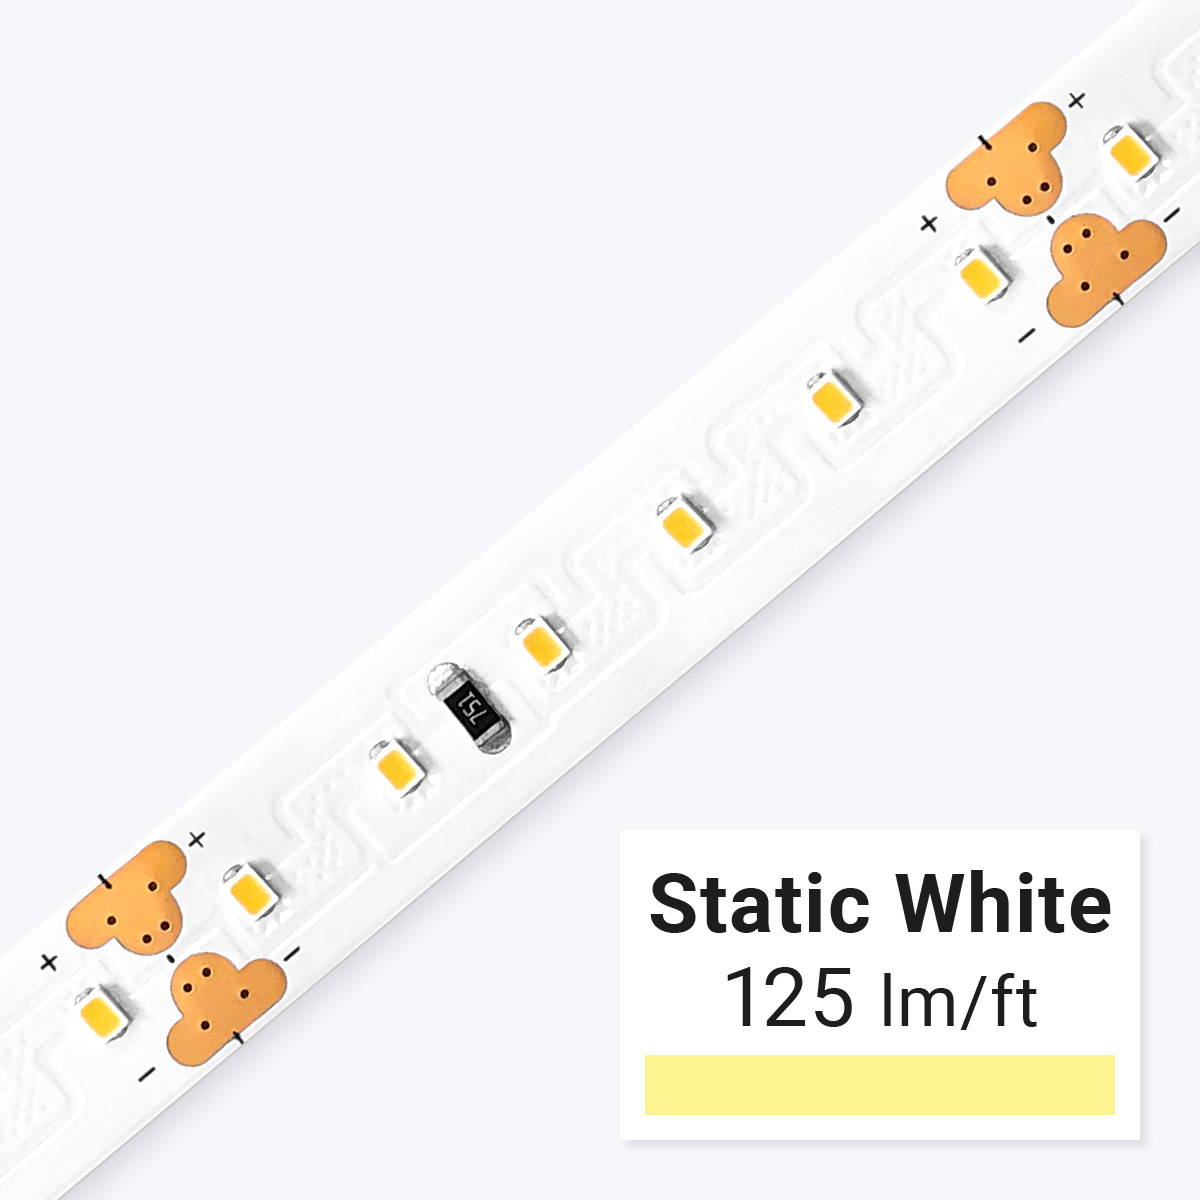 Outline Series LED Strip Light - Subtle accent lighting with long run length